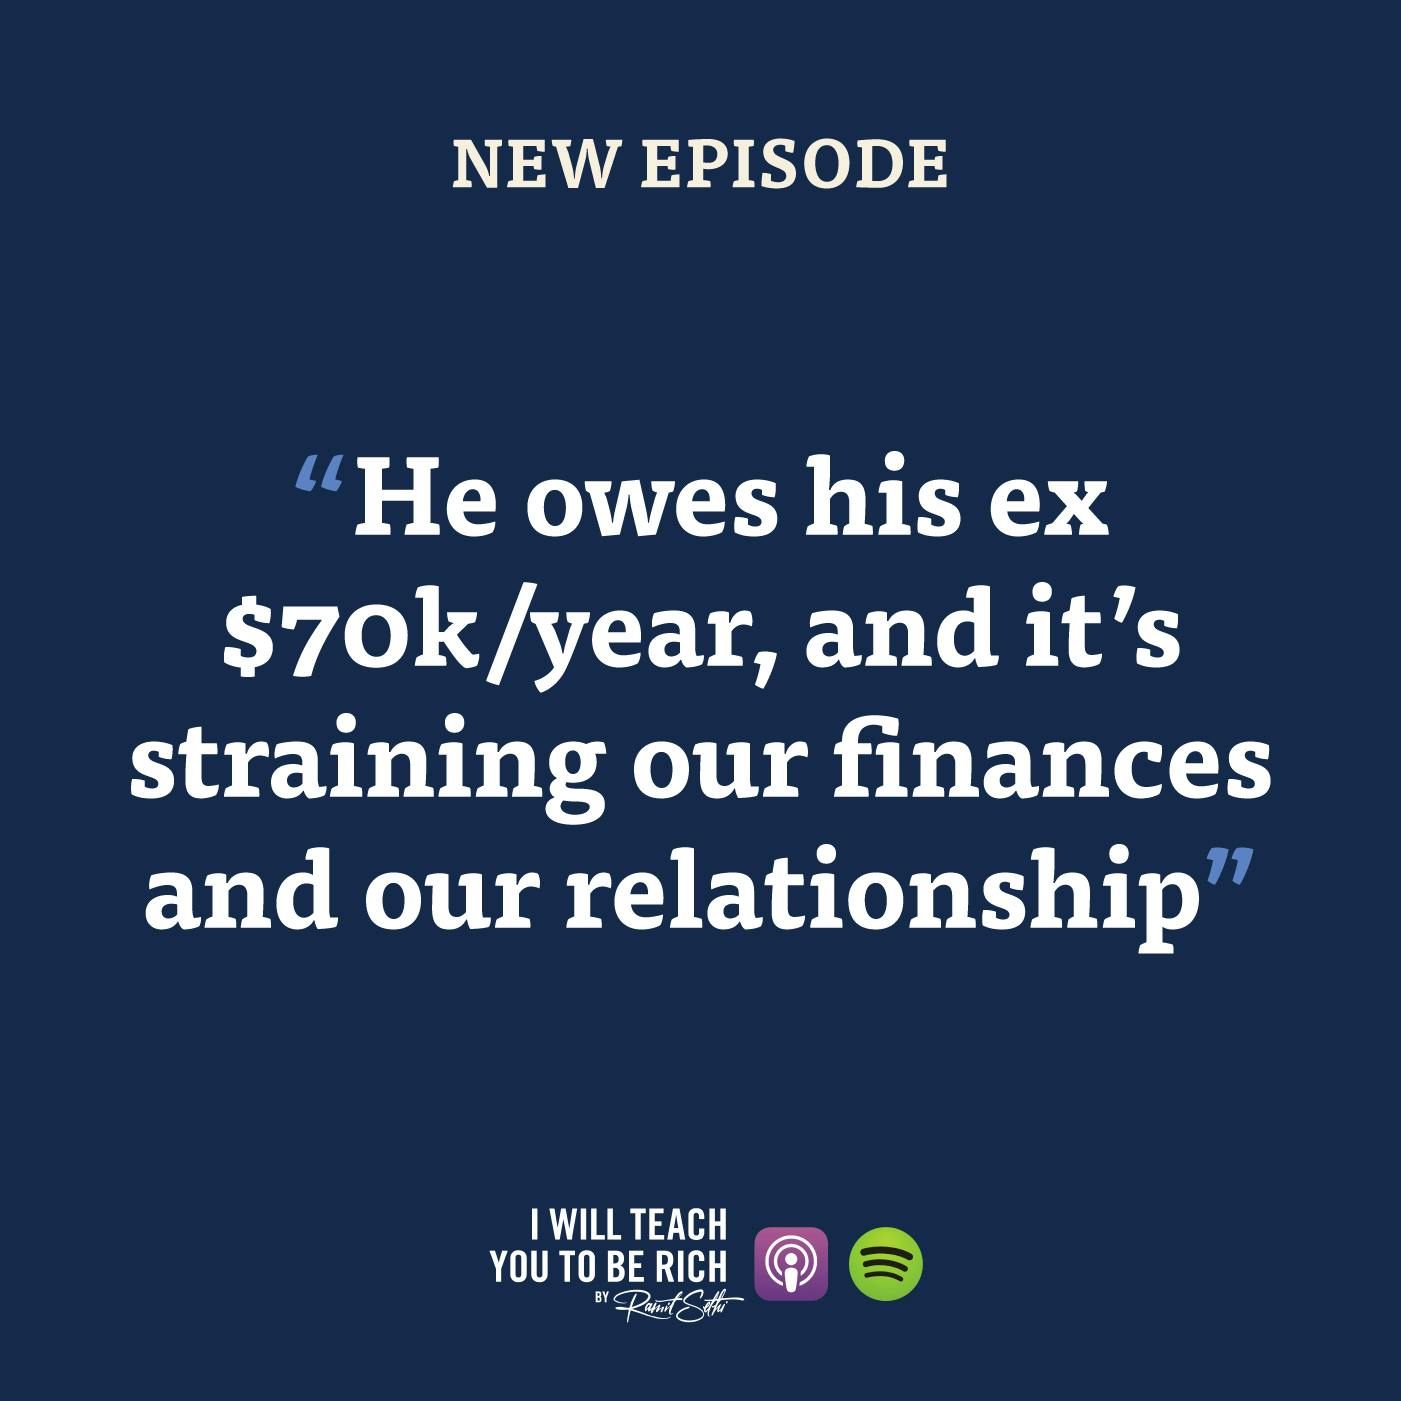 38. “He owes his ex $70k/year and it’s straining our finances and our relationship”